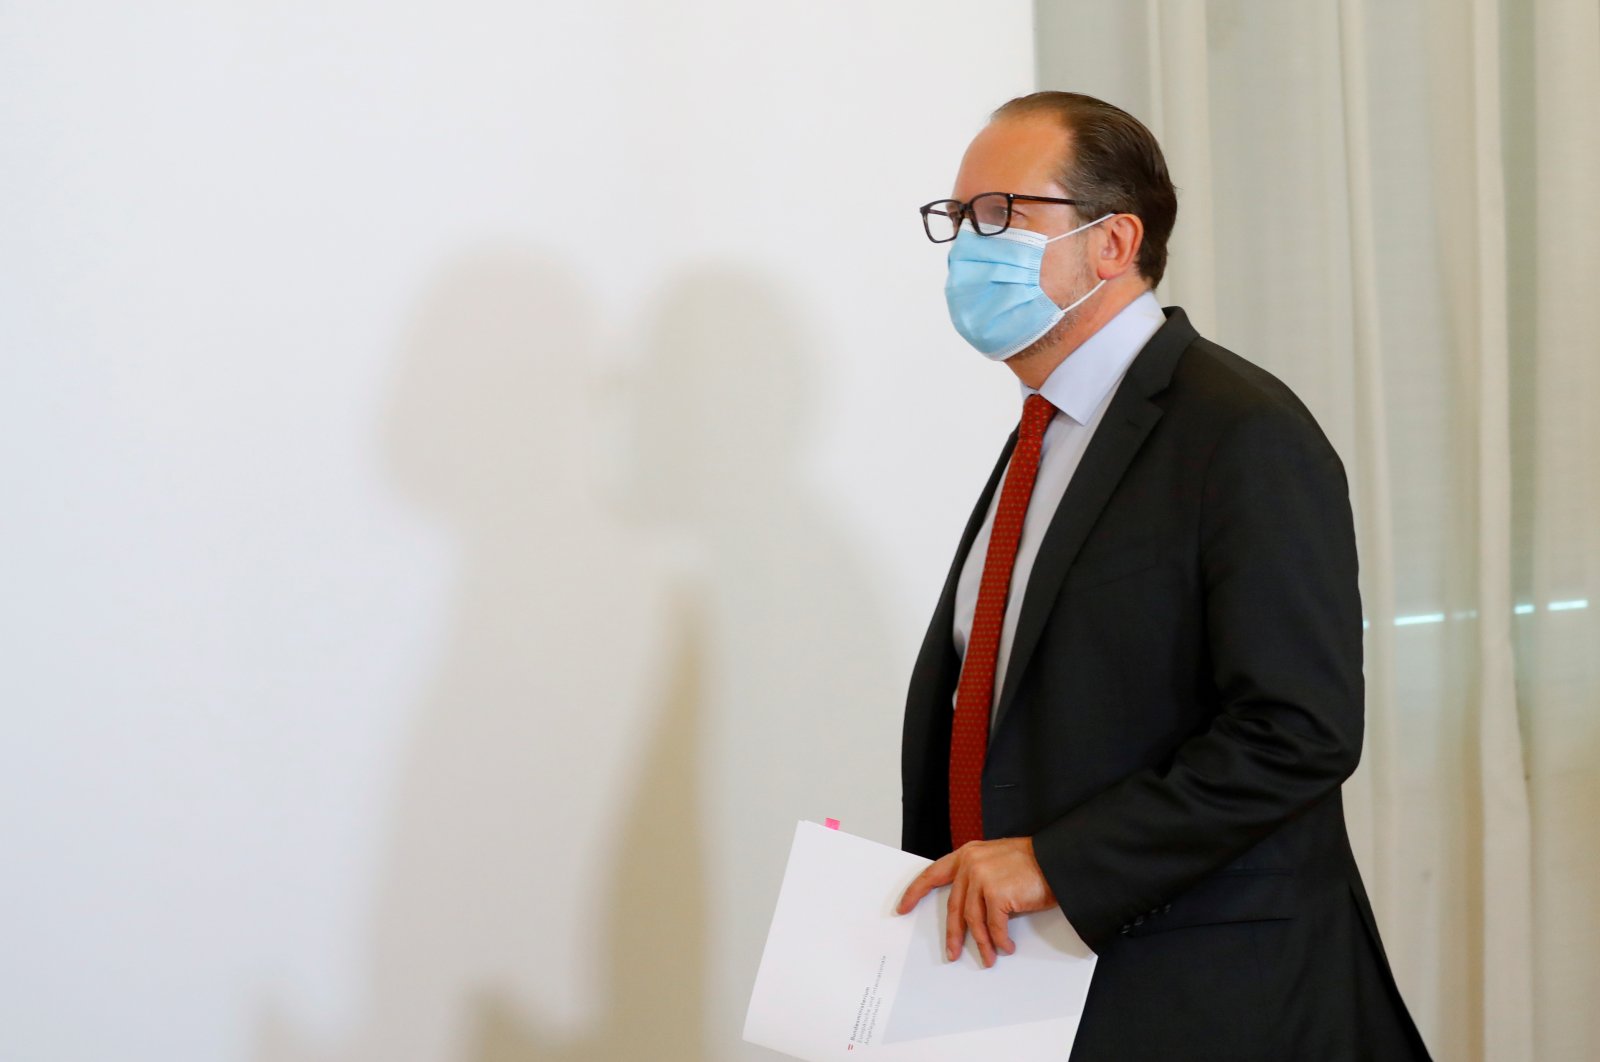 Austrian Foreign Minister Alexander Schallenberg, wearing a protective face mask, arrives for a news conference as the coronavirus disease outbreak continues in Vienna, Austria Sept. 16, 2020. (Reuters Photo)